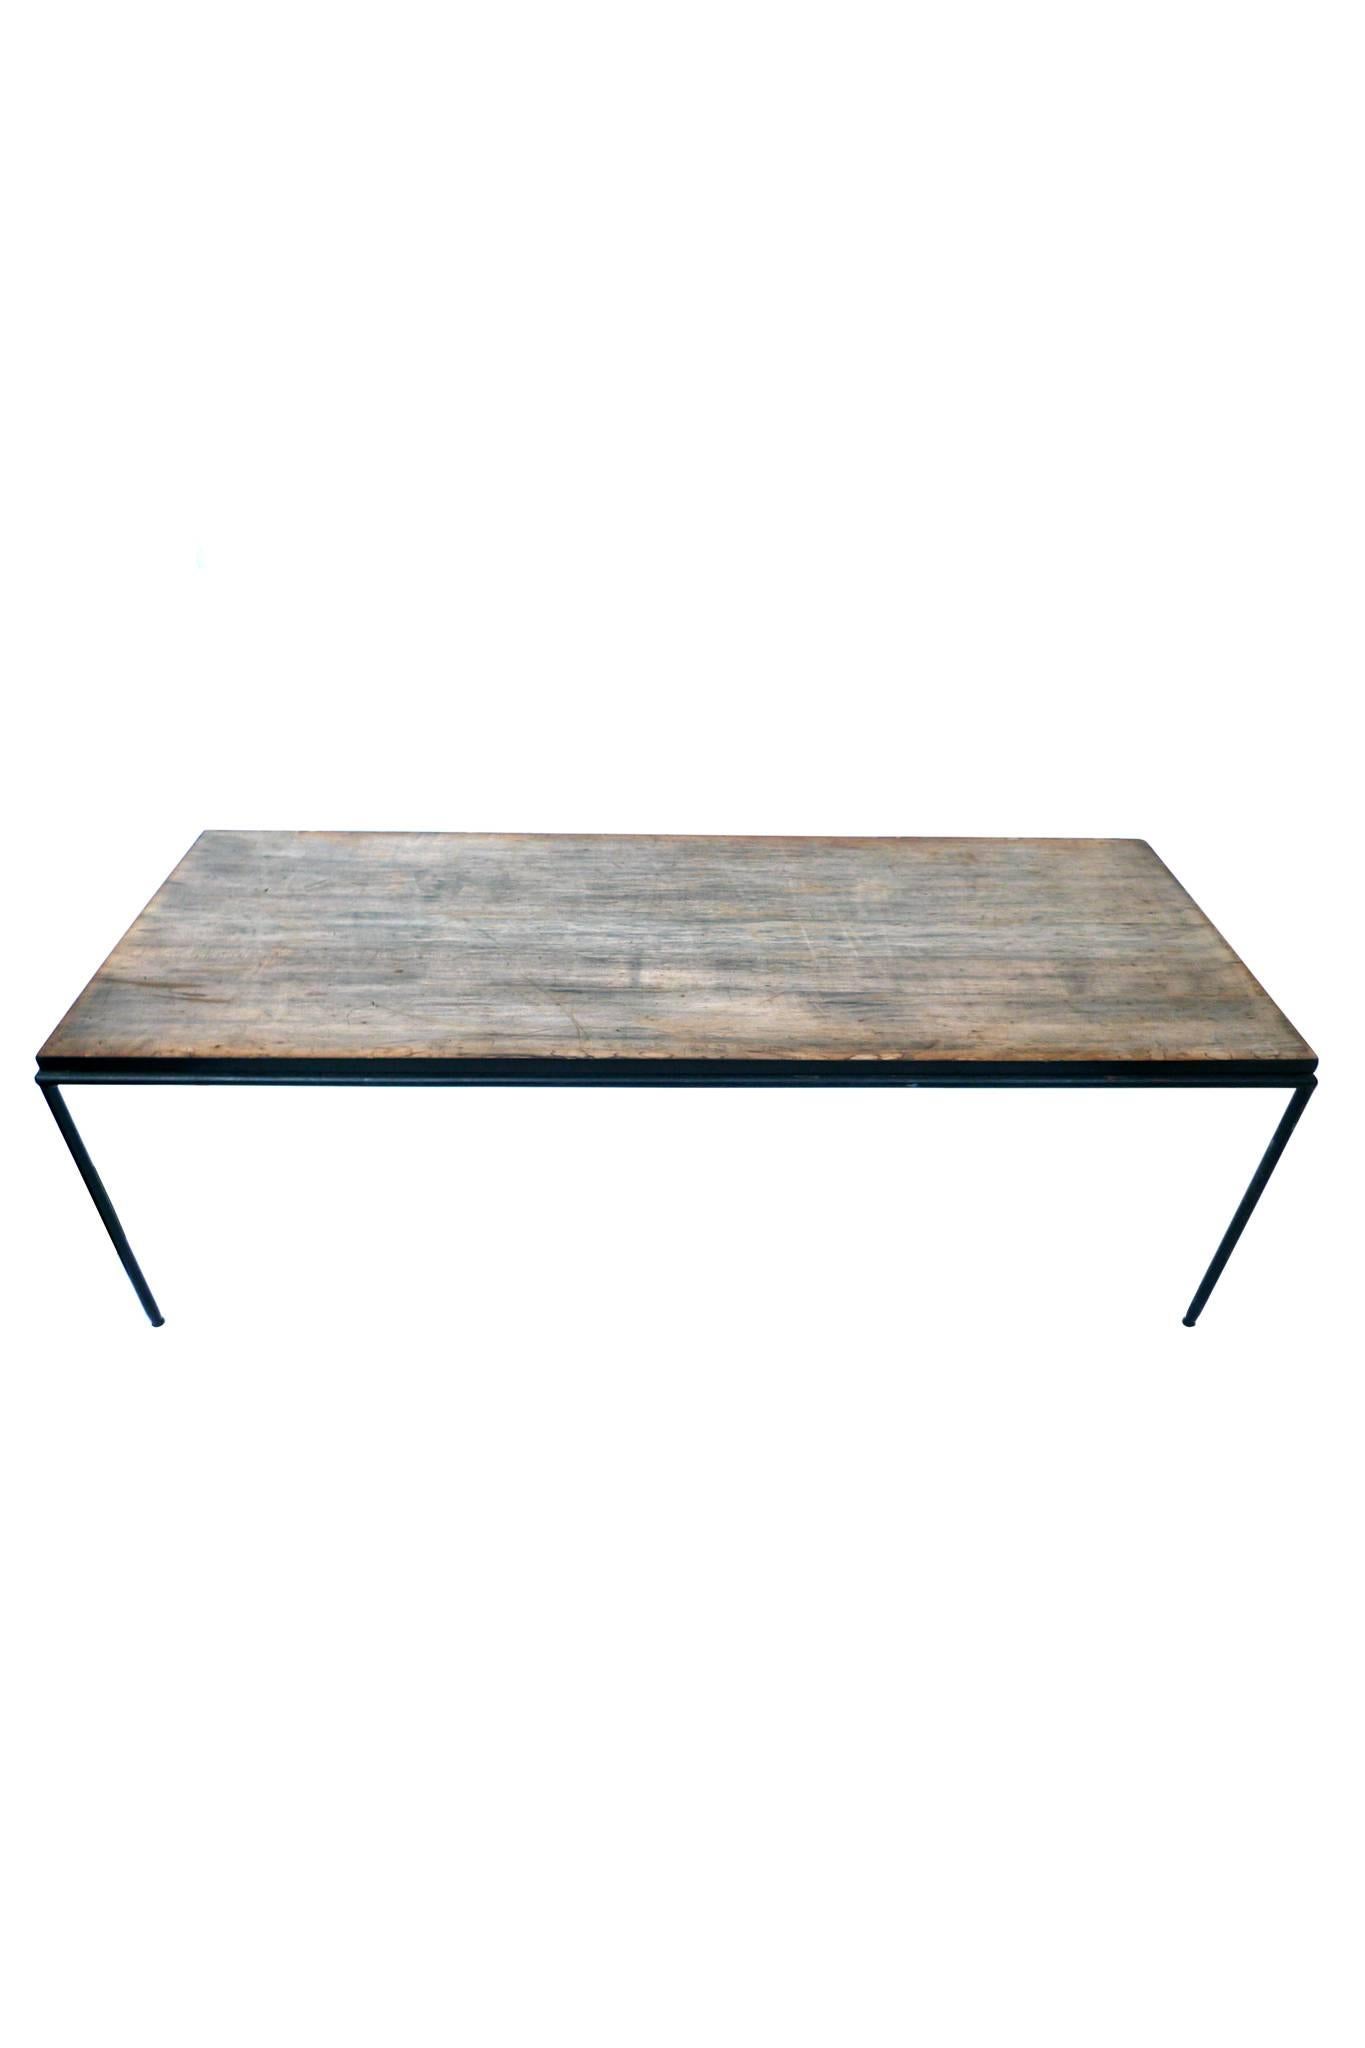 This midcentury table by Paul McCobb consists of a burnished teak table top and wrought iron frame and legs. The teak top has a very rich distressed look. It's smooth and beautifully aged. The sides are painted black, as are the wrought iron frame